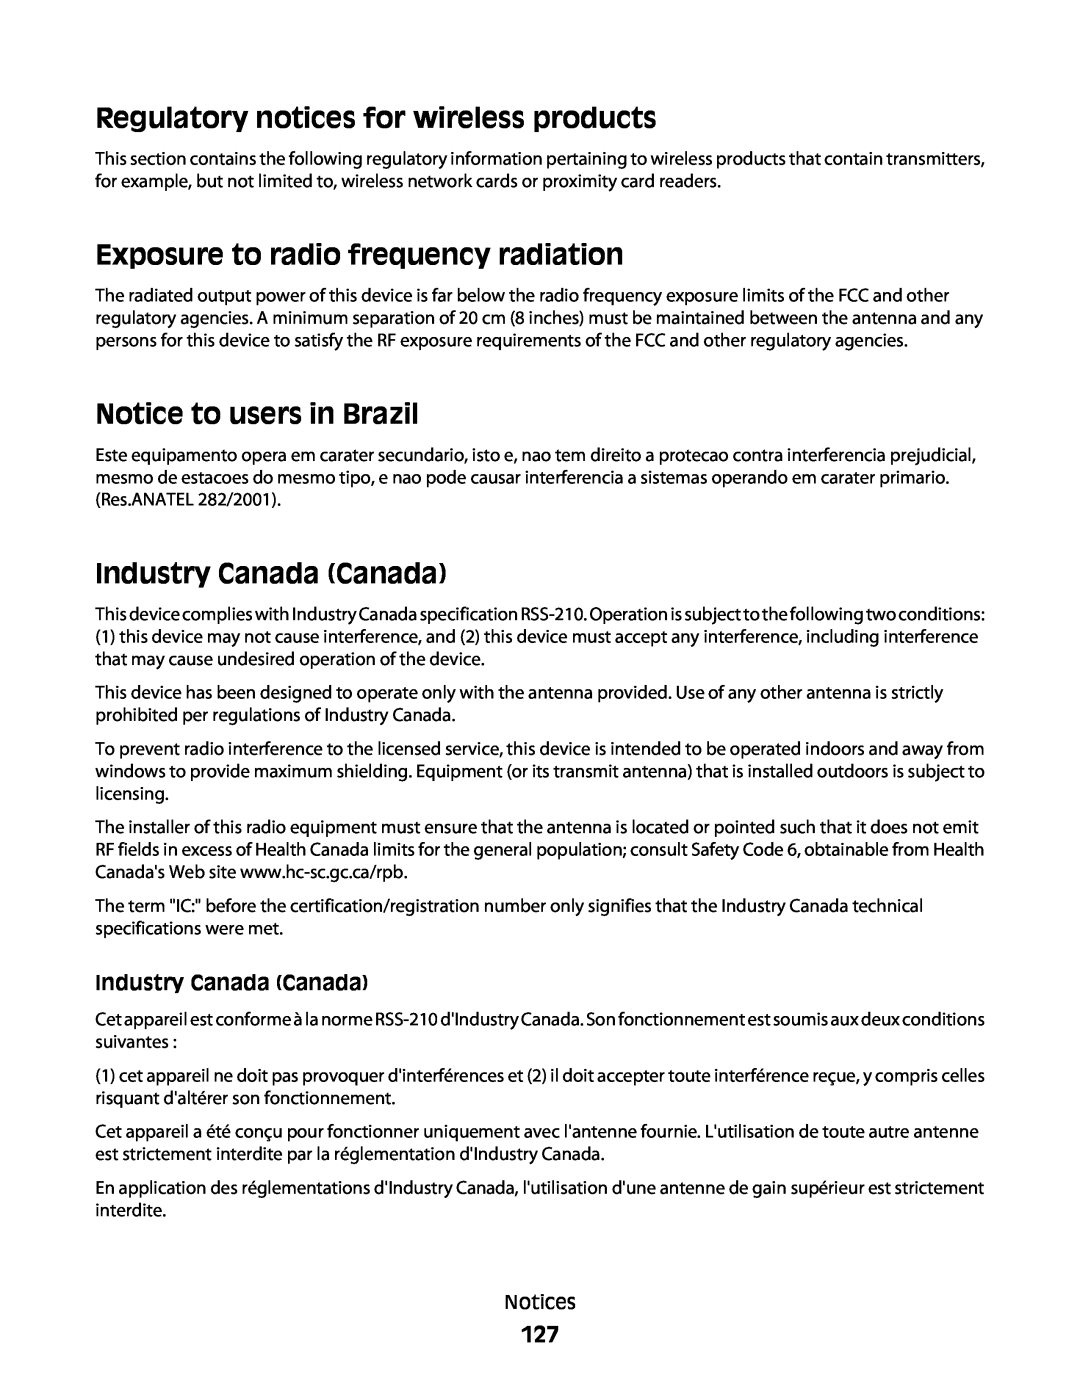 Lexmark 10E Regulatory notices for wireless products, Exposure to radio frequency radiation, Notice to users in Brazil 